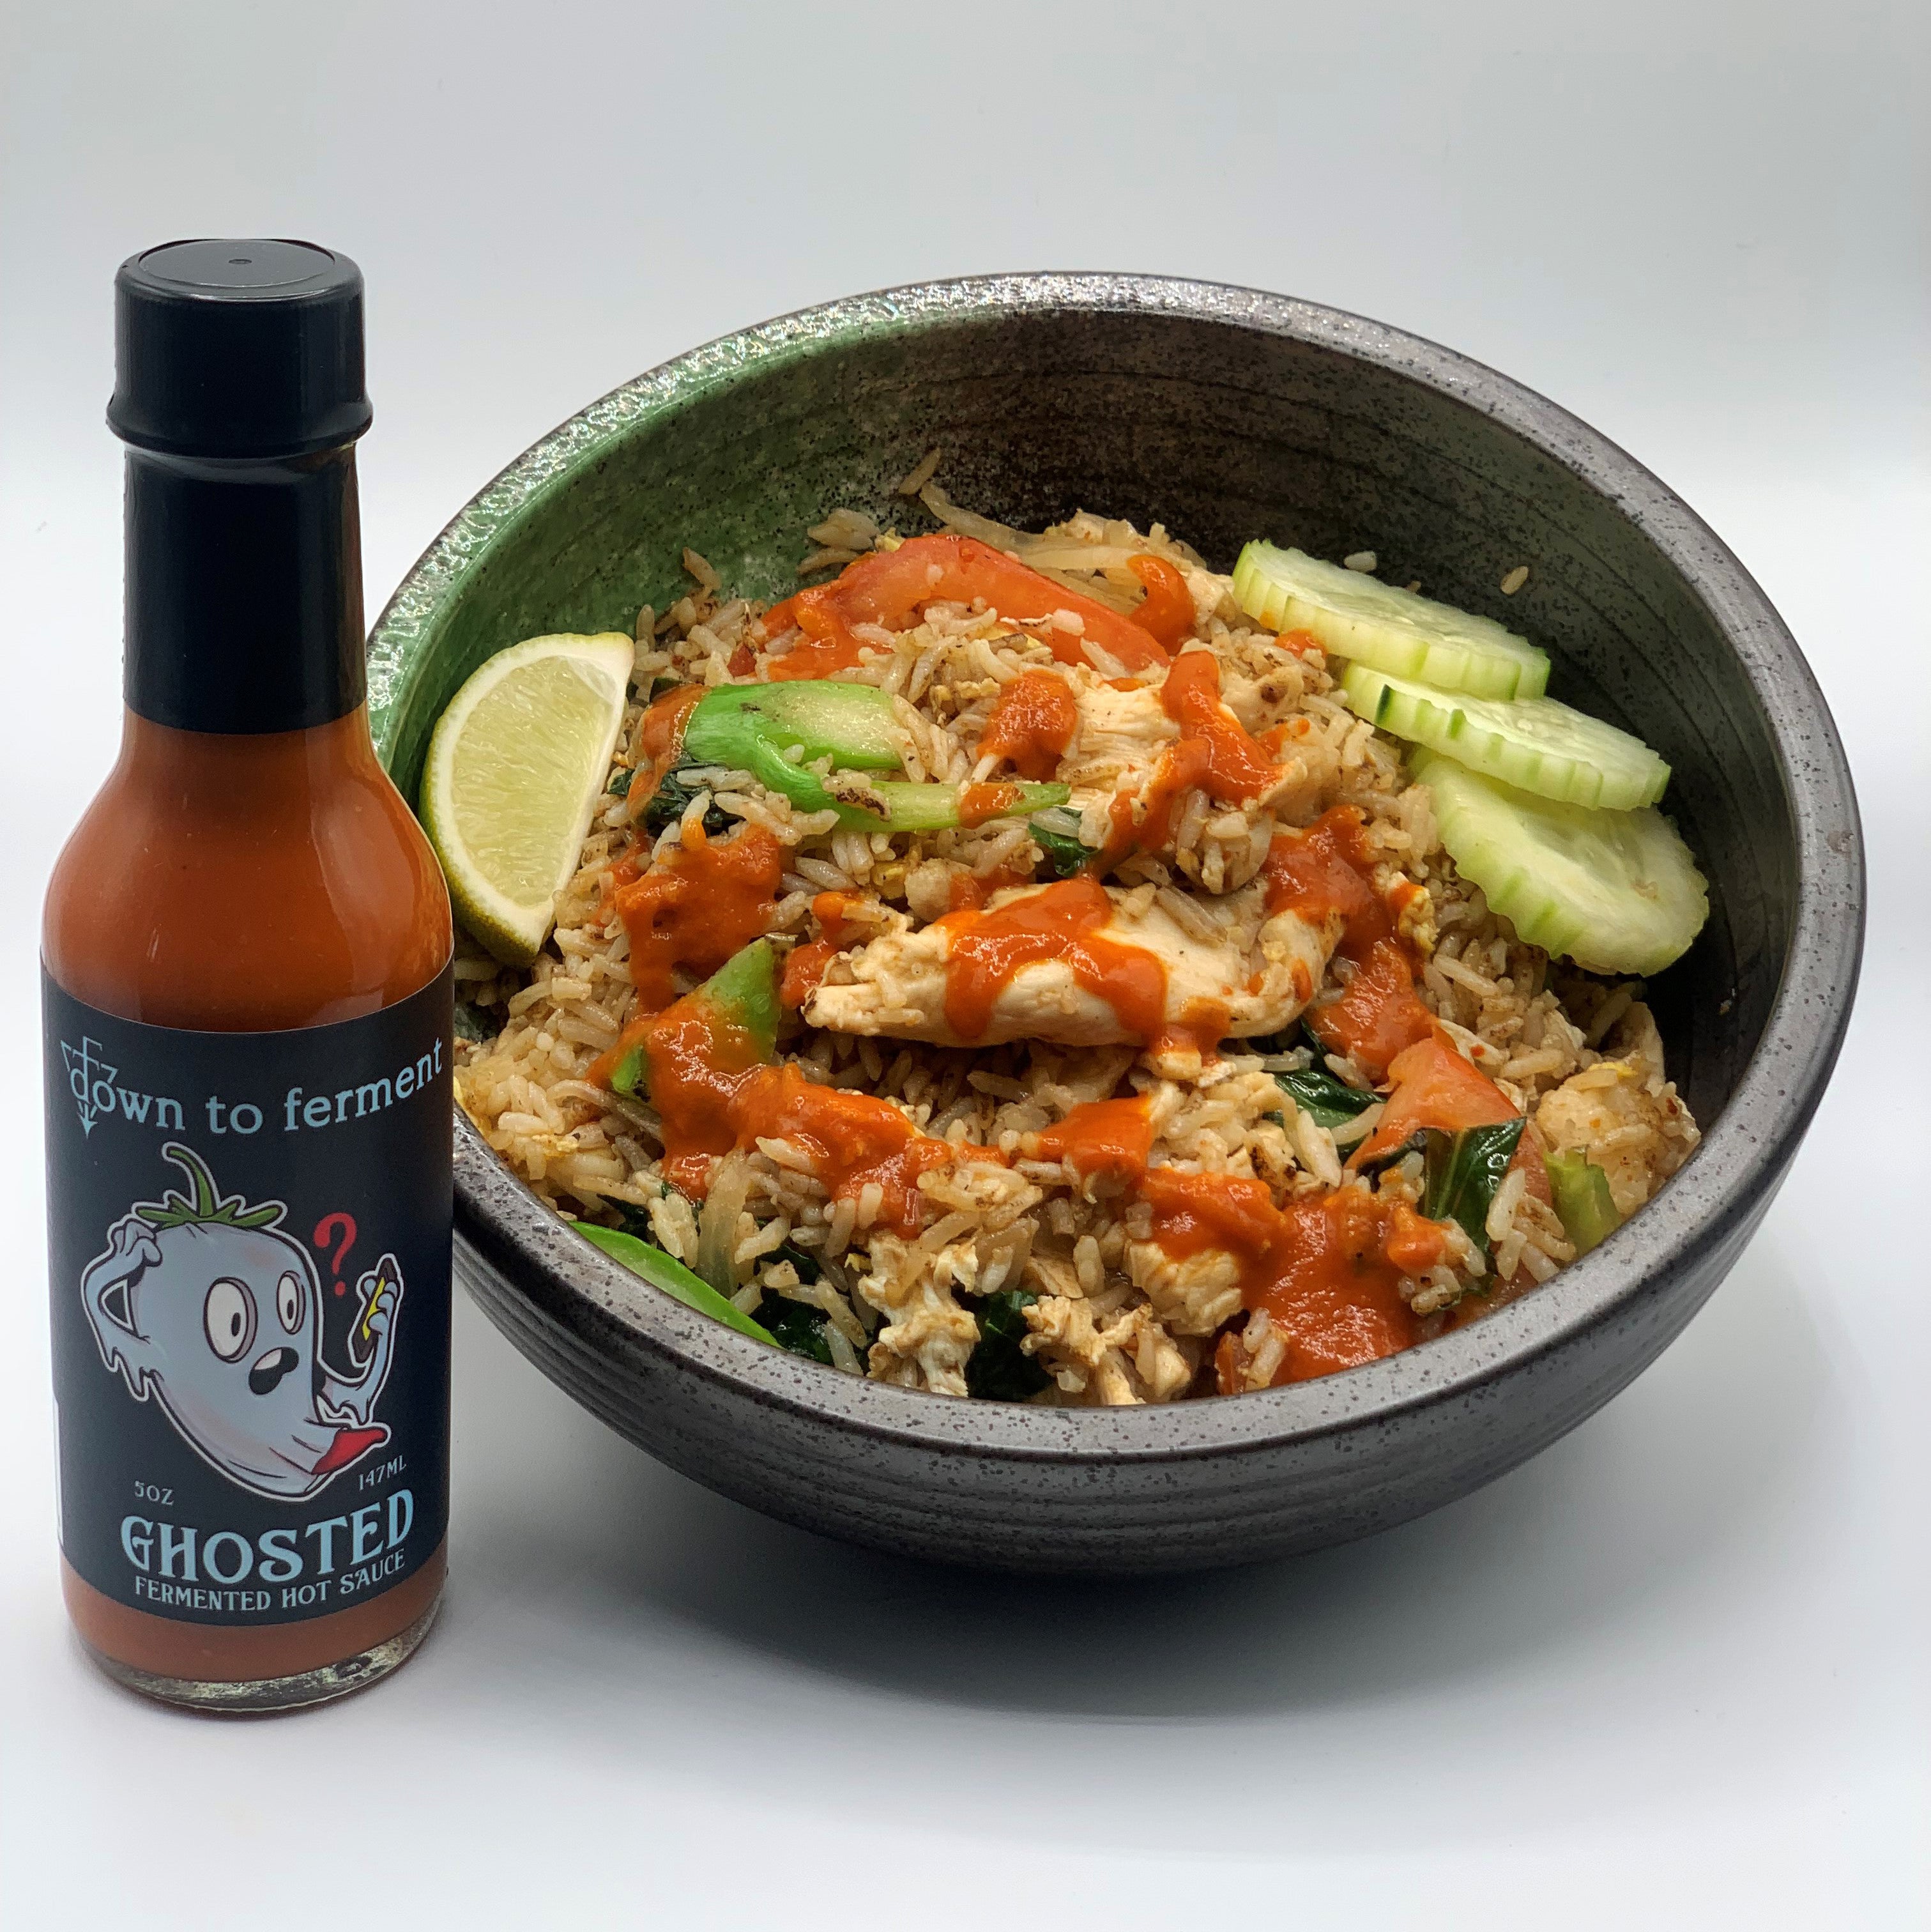 Ghosted Hot Sauce in a fried rice bowl. Down To Ferment vegan hot sauce - San Diego's Hot Sauce